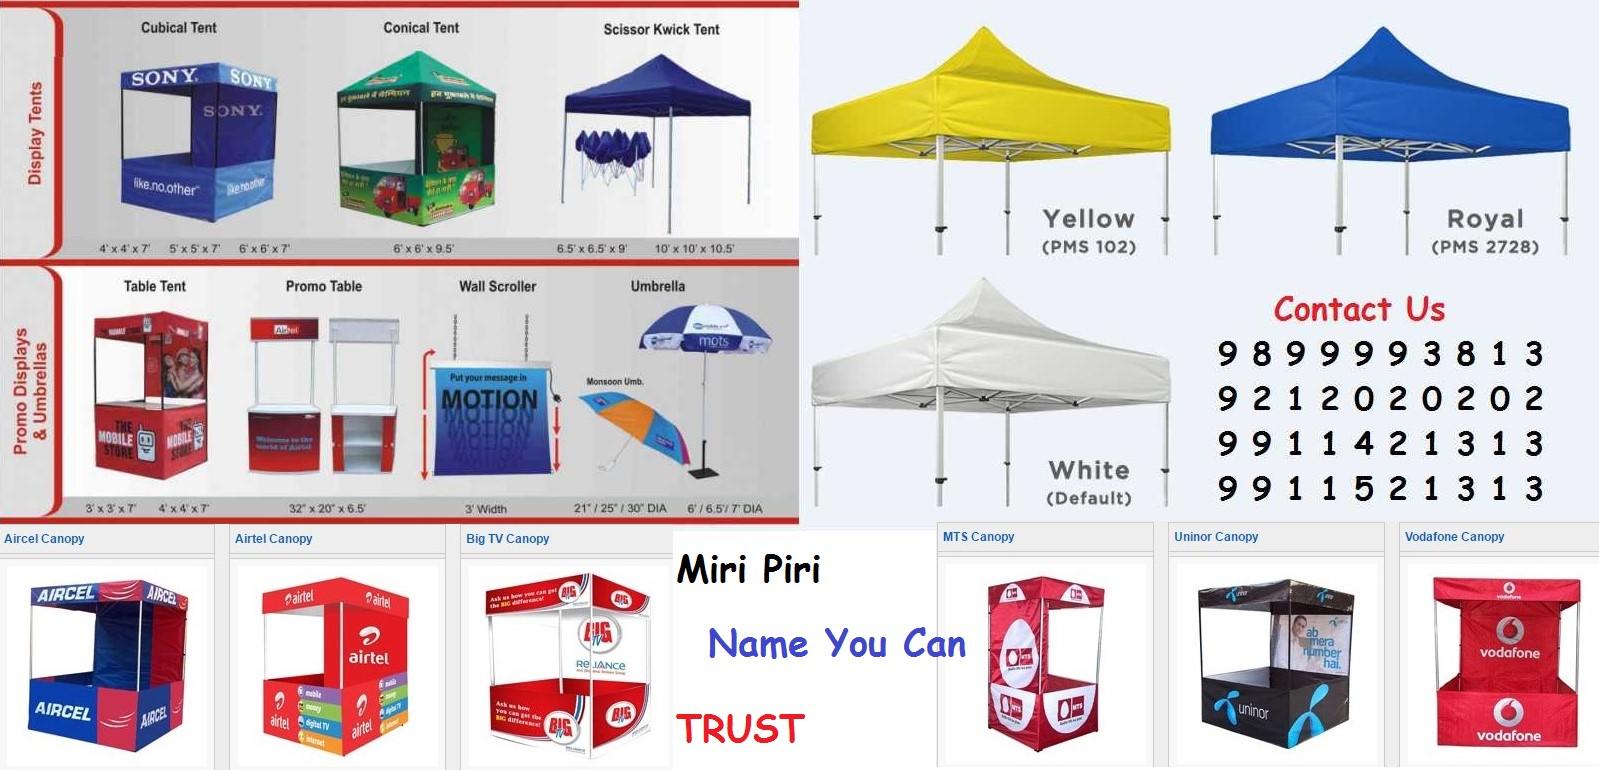 Manufacturers of Demo Tents Unique Latest Modular Designs, Low Price, Best Quality, Fast Delivery